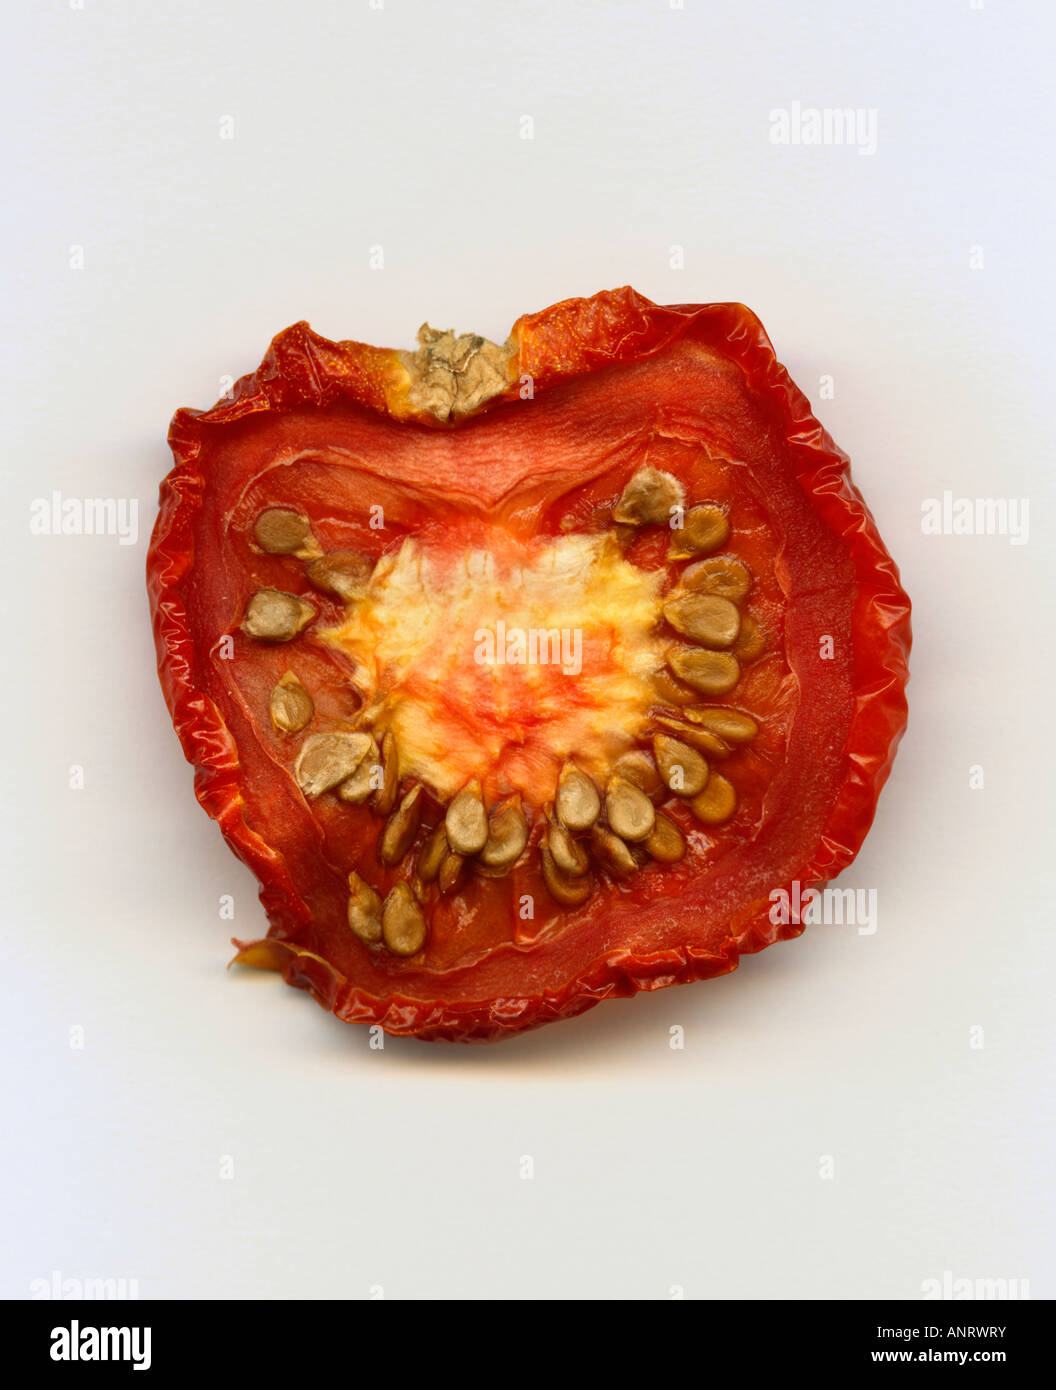 Dried red tomato on plain background, close-up Stock Photo